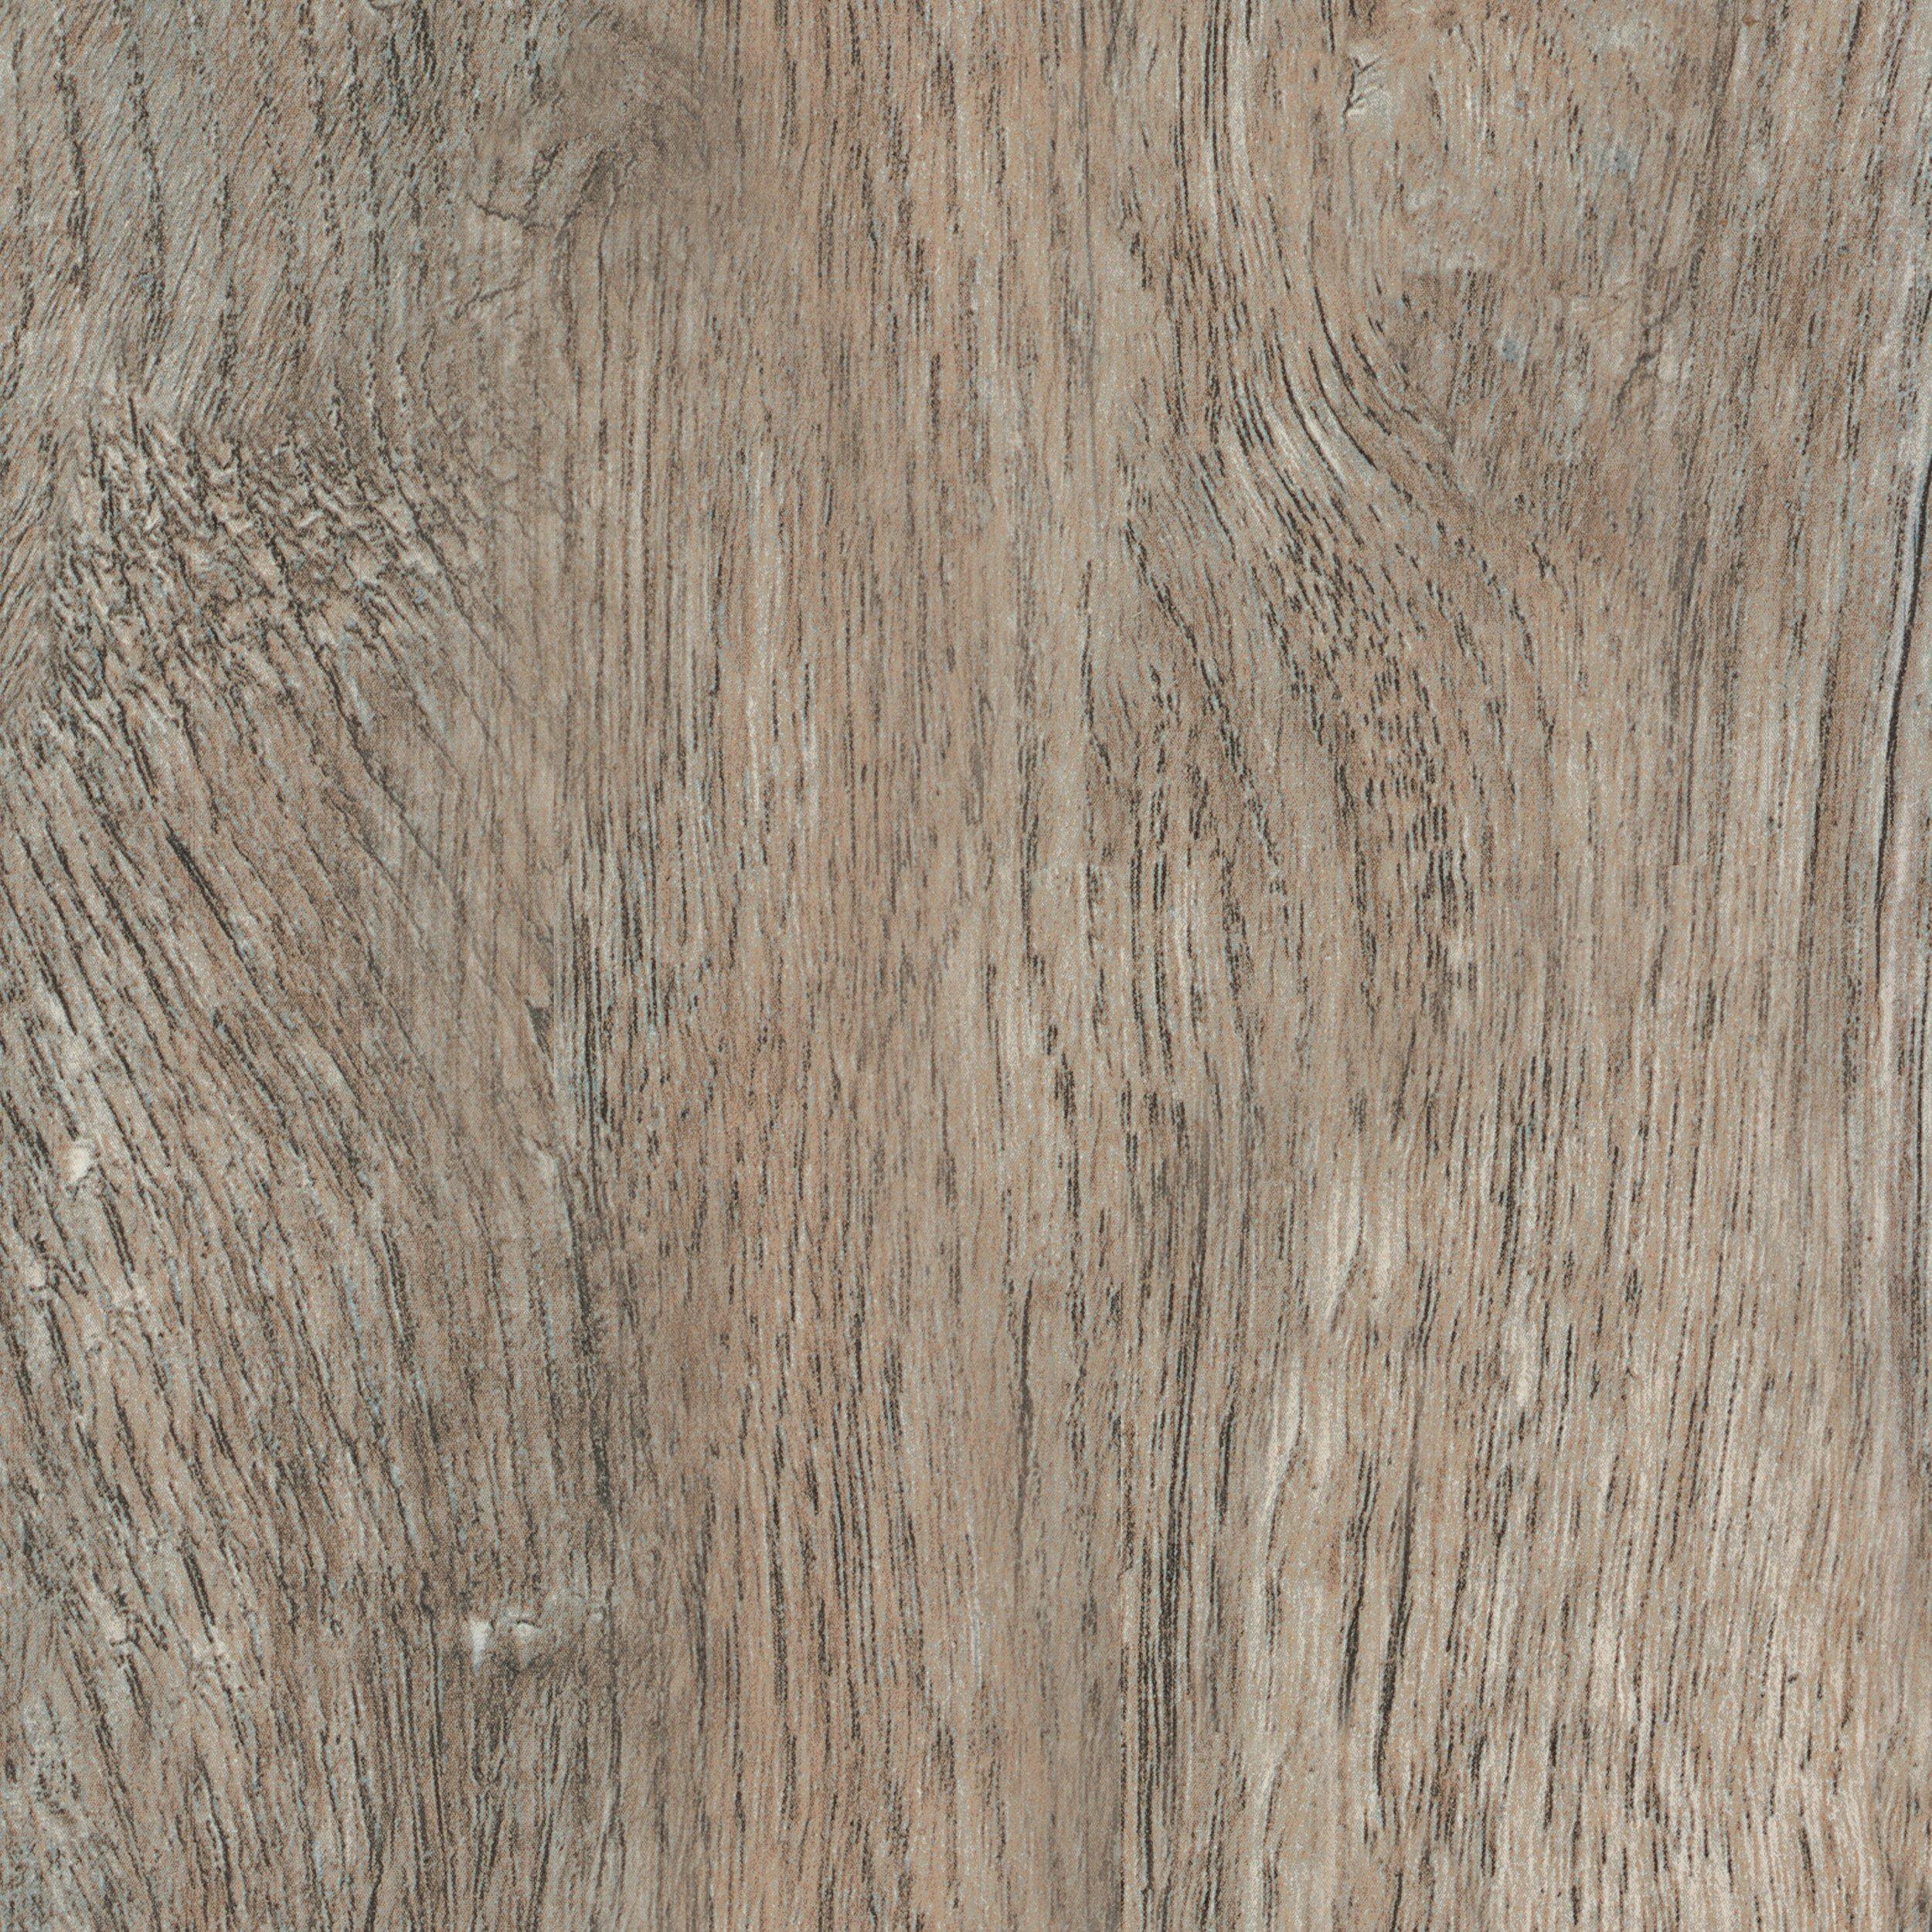 Sea Island Oak 94in. Laminate Overlapping Stair Nose